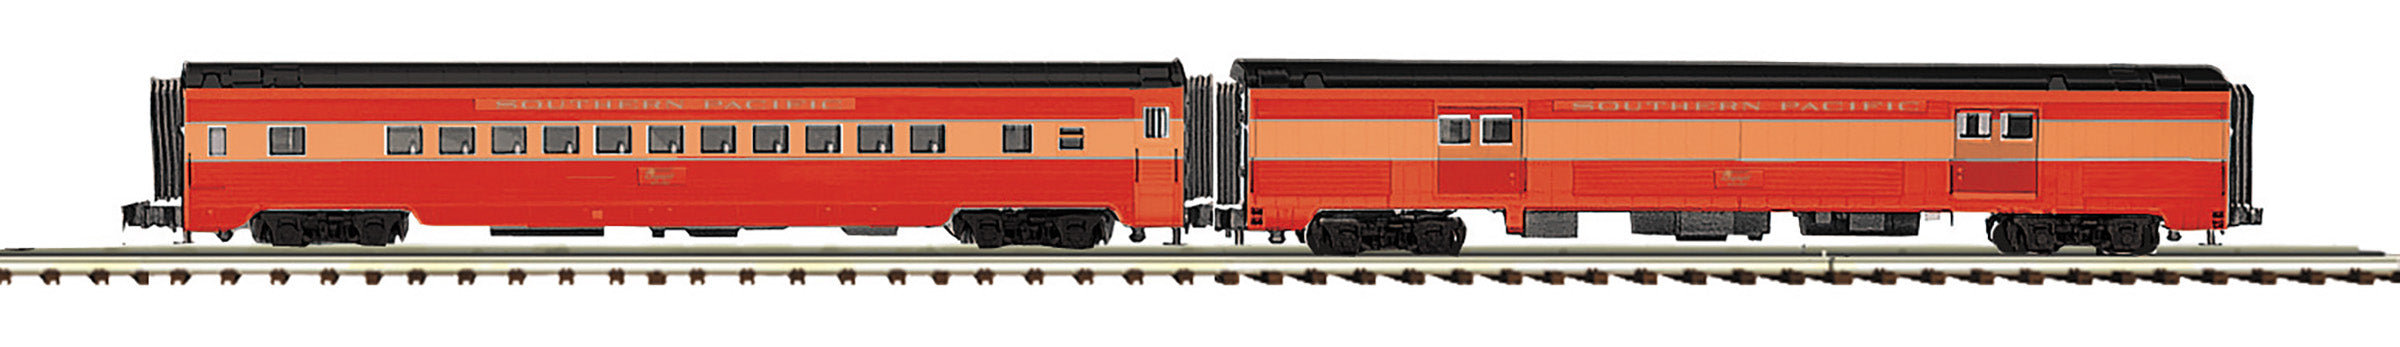 MTH 20-64240 - 70’ Streamlined Baggage/Coach Passenger Set "Southern Pacific" (Daylight) Smooth Sided (2-Car)